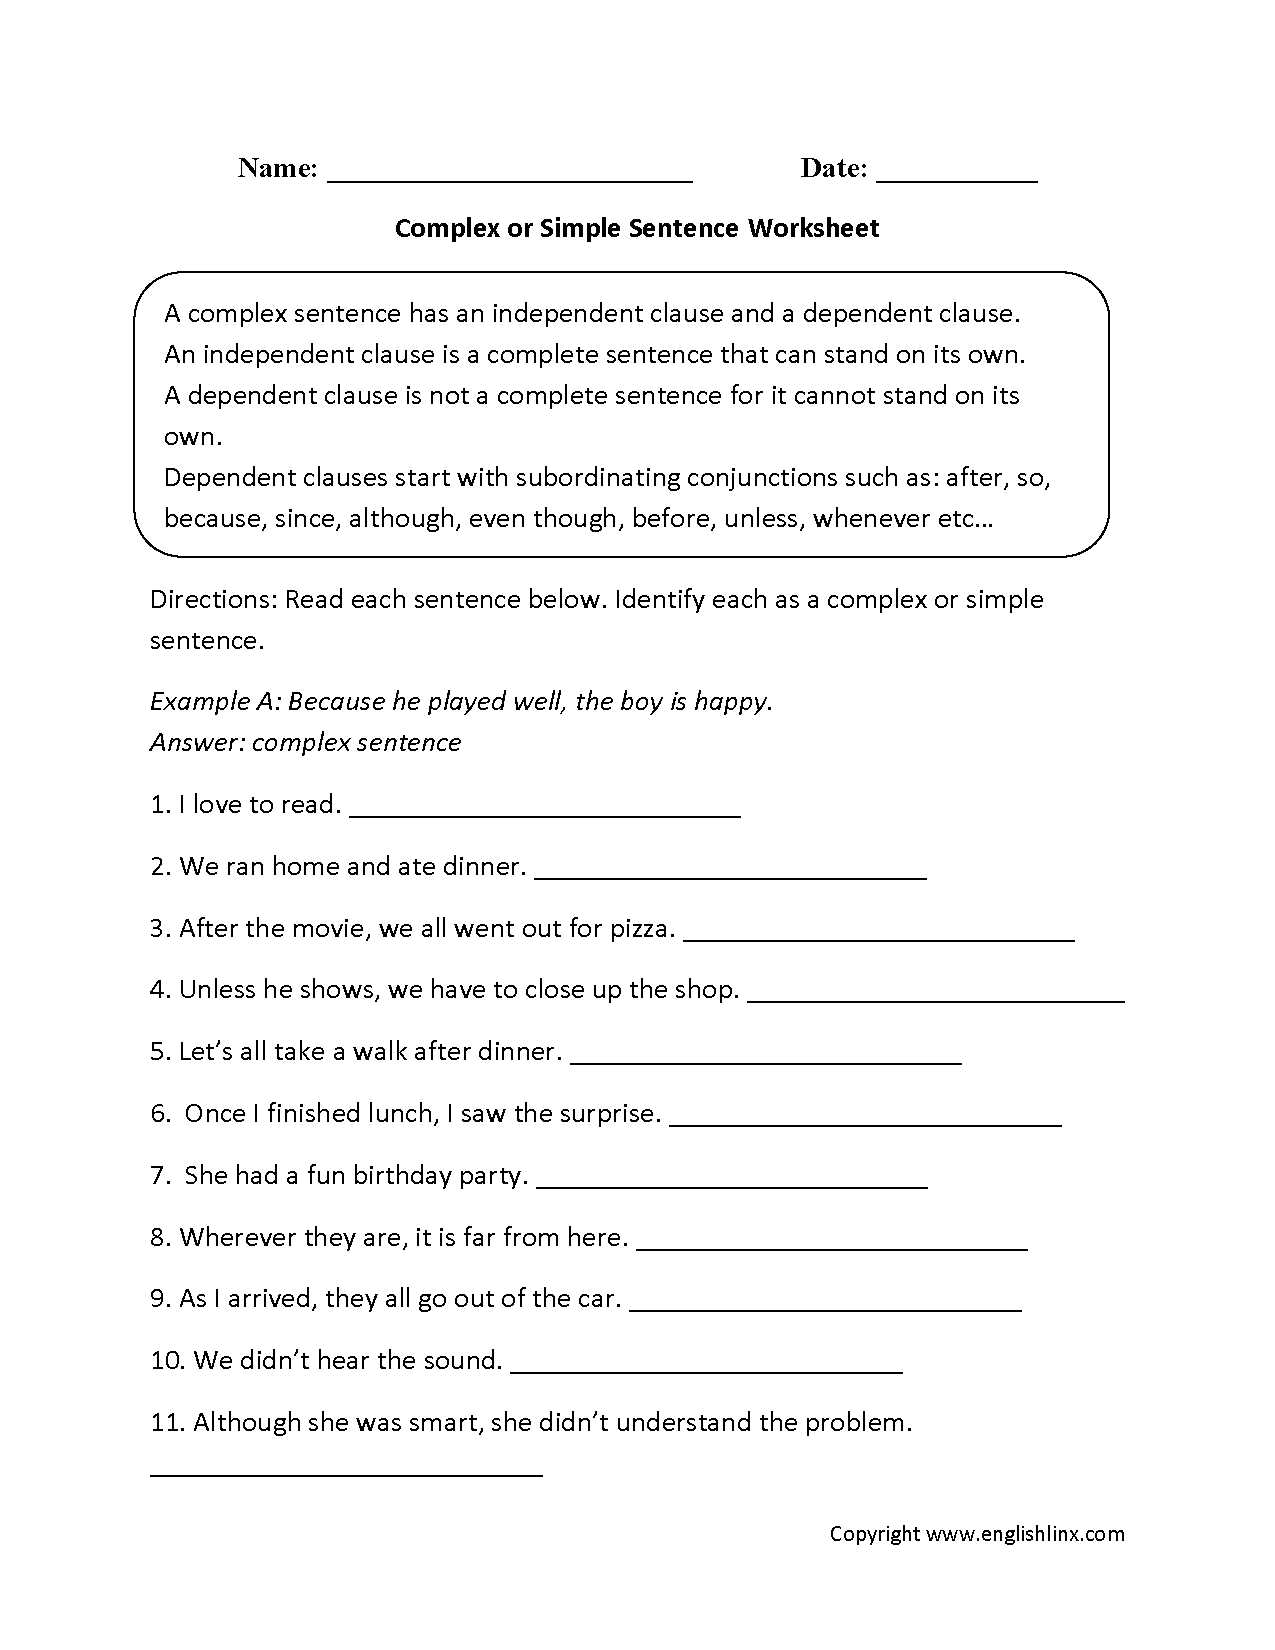 Simple and Compound Interest Worksheet Answers or Plex or Simple Sentences Worksheet Mona Pinterest